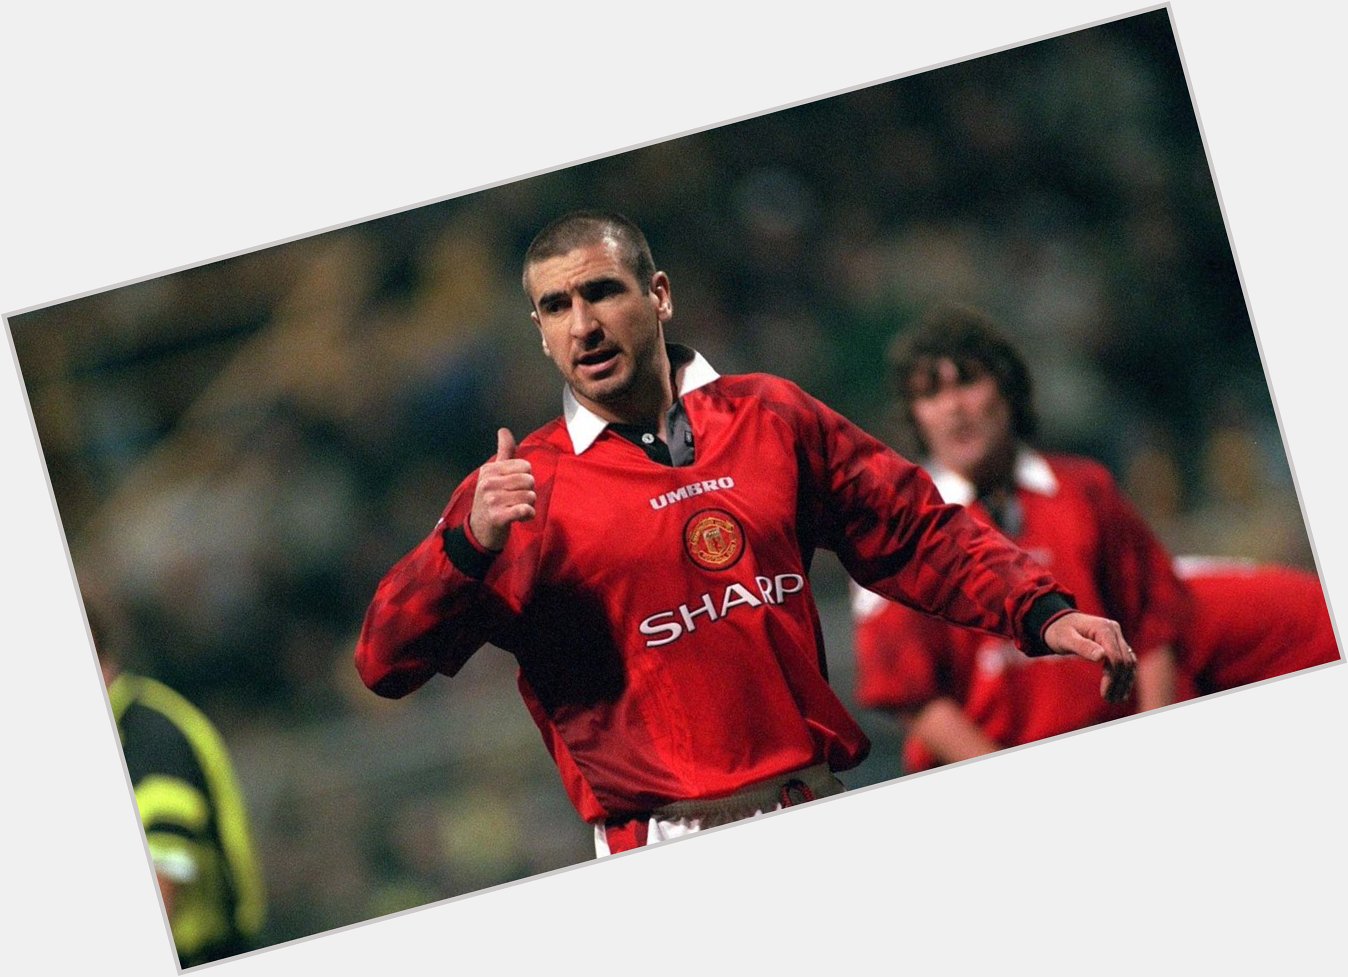 Happy birthday to Manchester United legend Eric Cantona, who turns 52 today! 